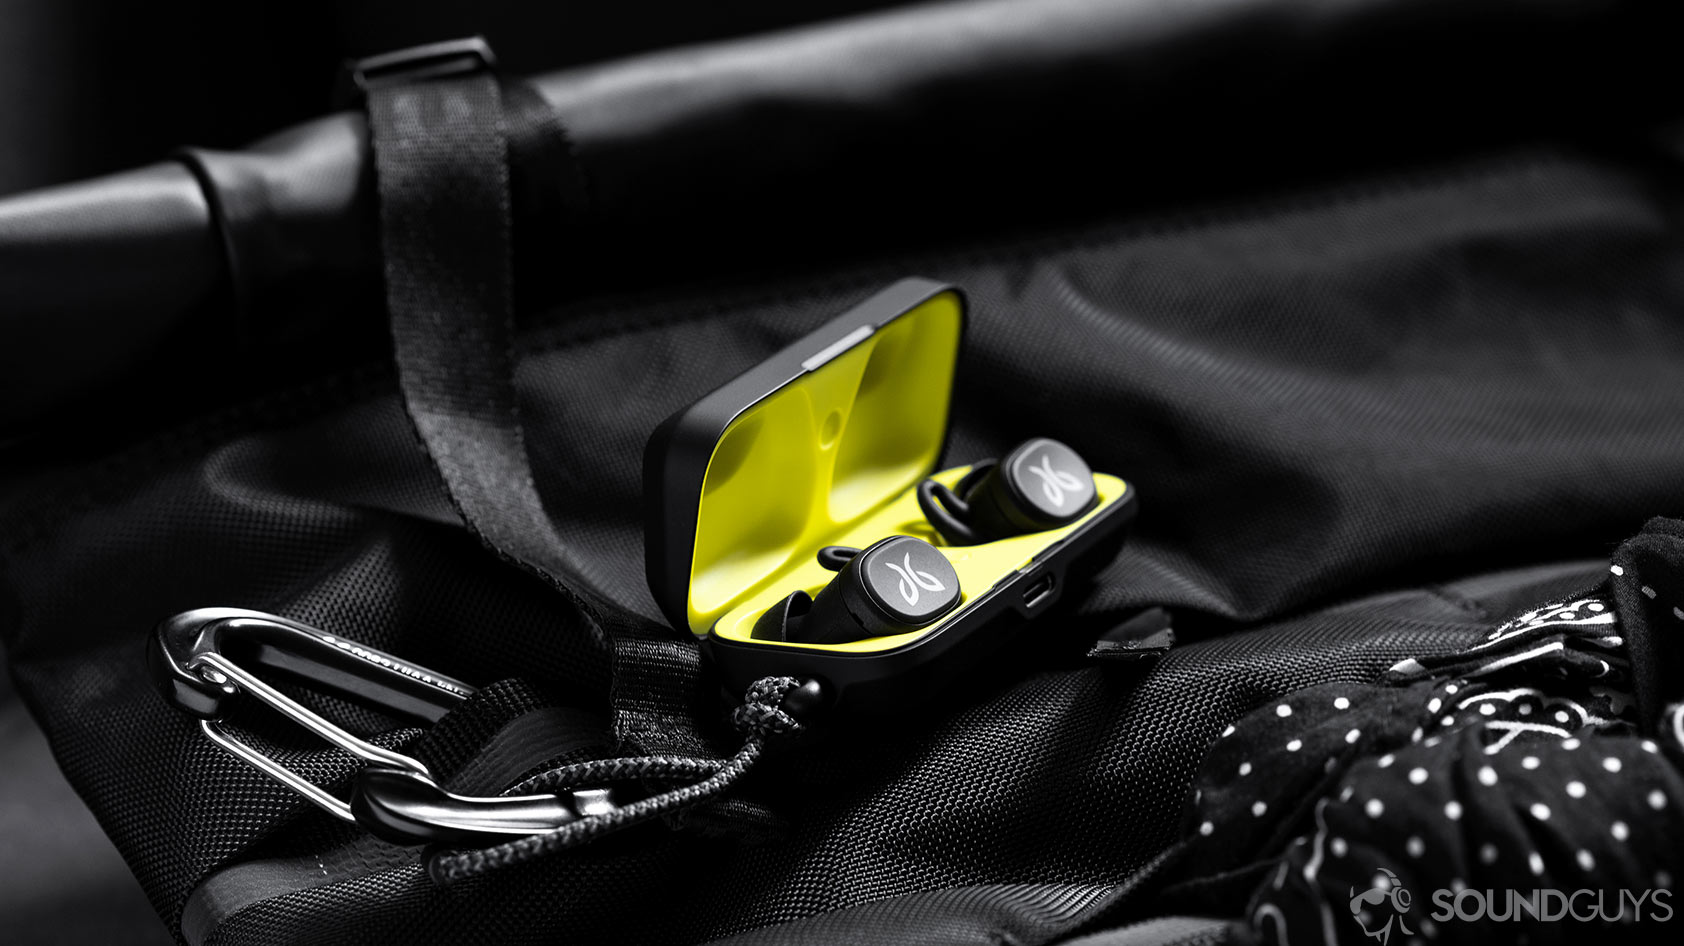 Jaybird Vista earbuds in charging case which is open and on a Chrome backpack.